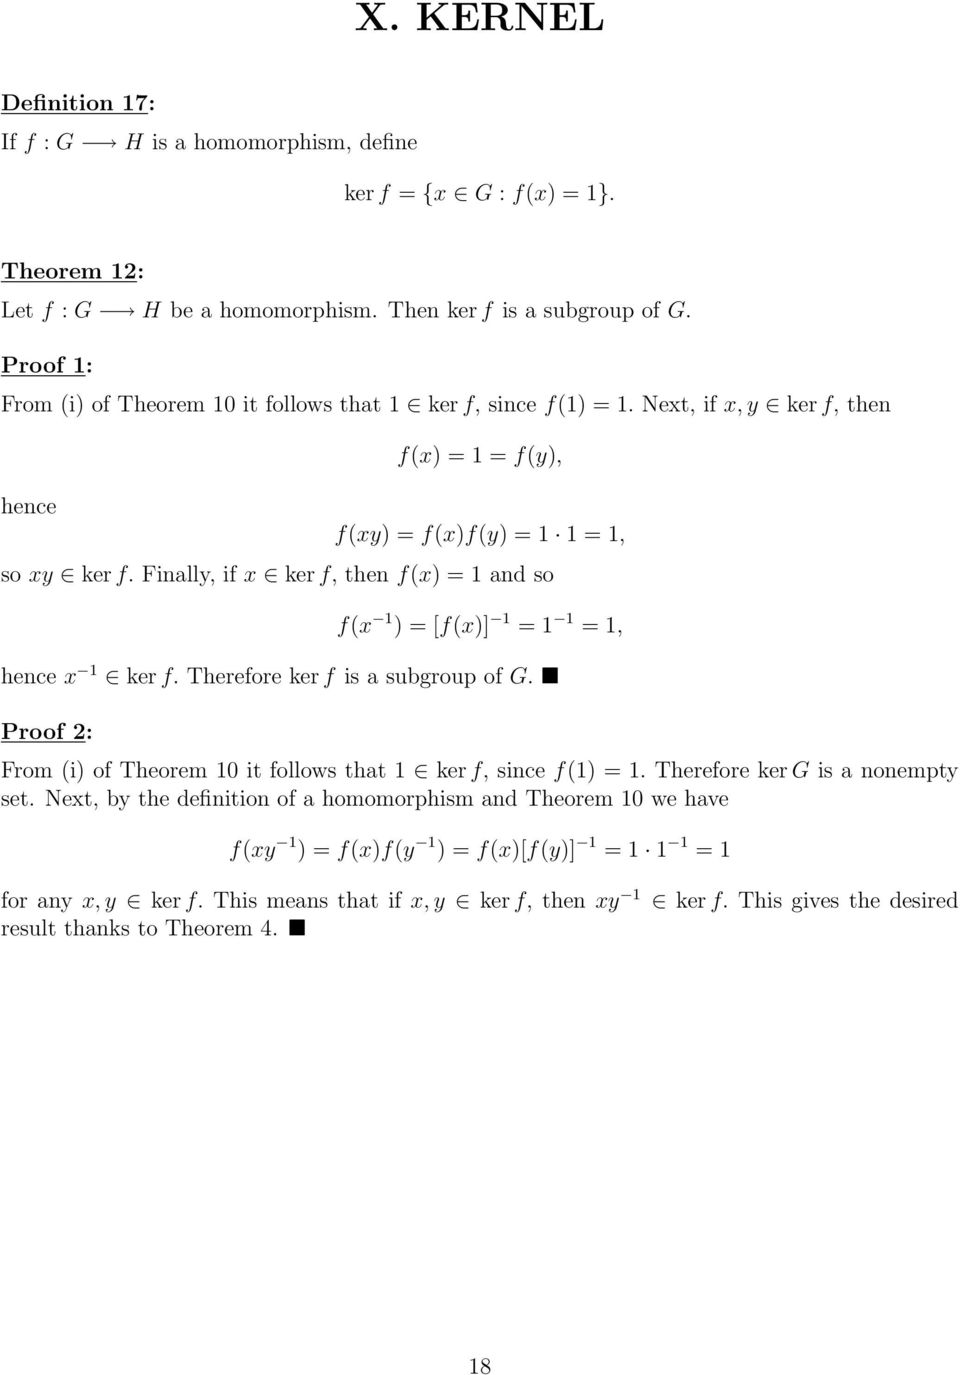 1, hence x 1 ker f Therefore ker f is a subgroup of G Proof 2: From (i) of Theorem 10 it follows that 1 ker f, since f(1) = 1 Therefore ker G is a nonempty set Next, by the definition of a